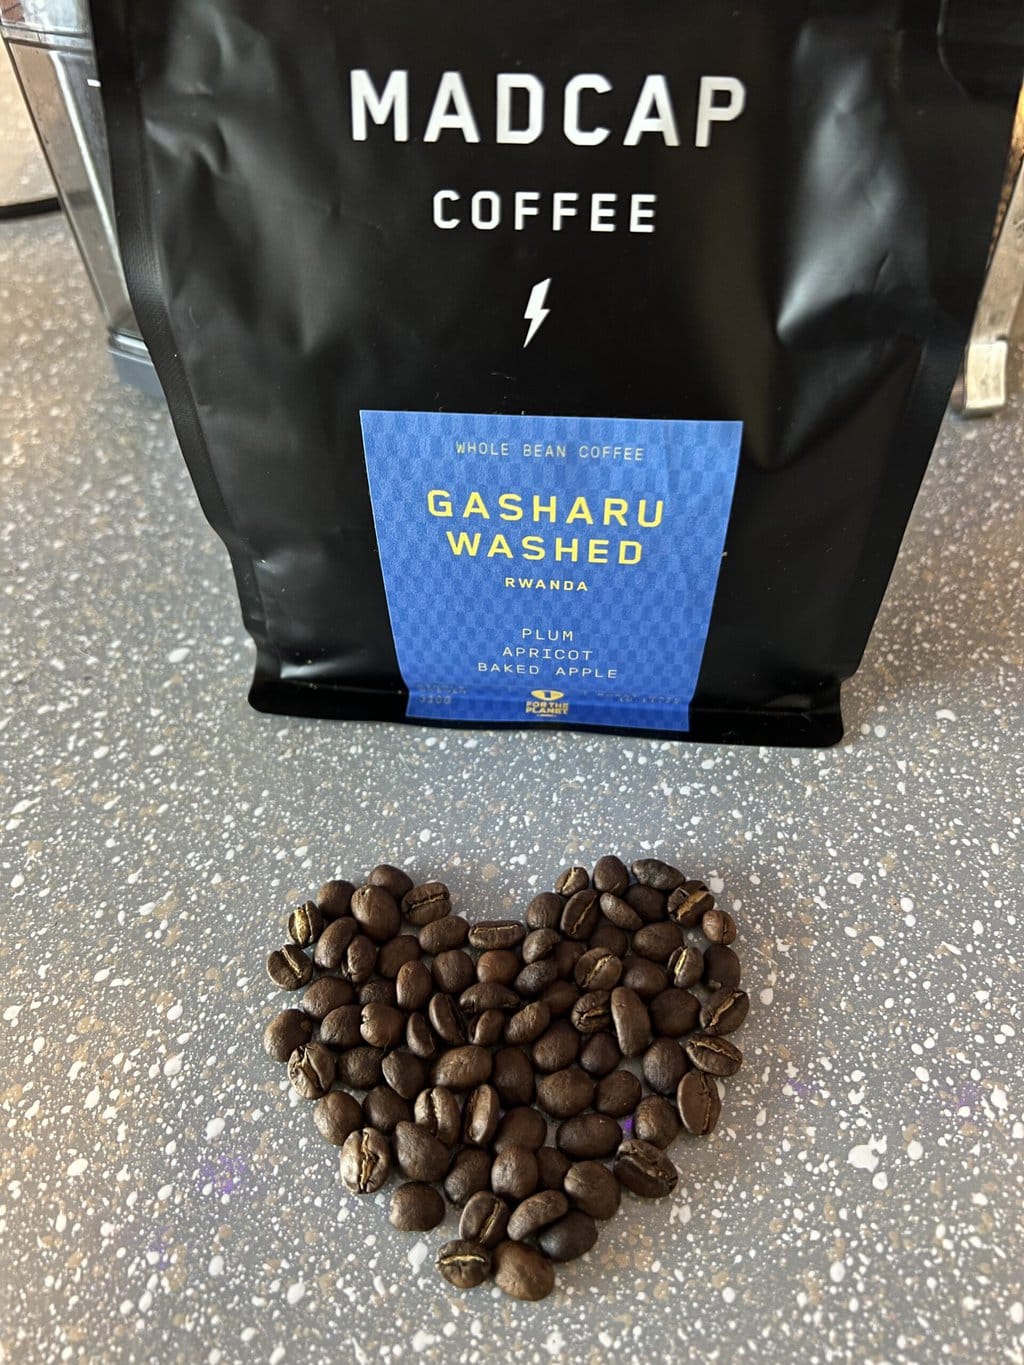 Gasharu Washed - Madcap coffee packaging and heart shaped coffee beans